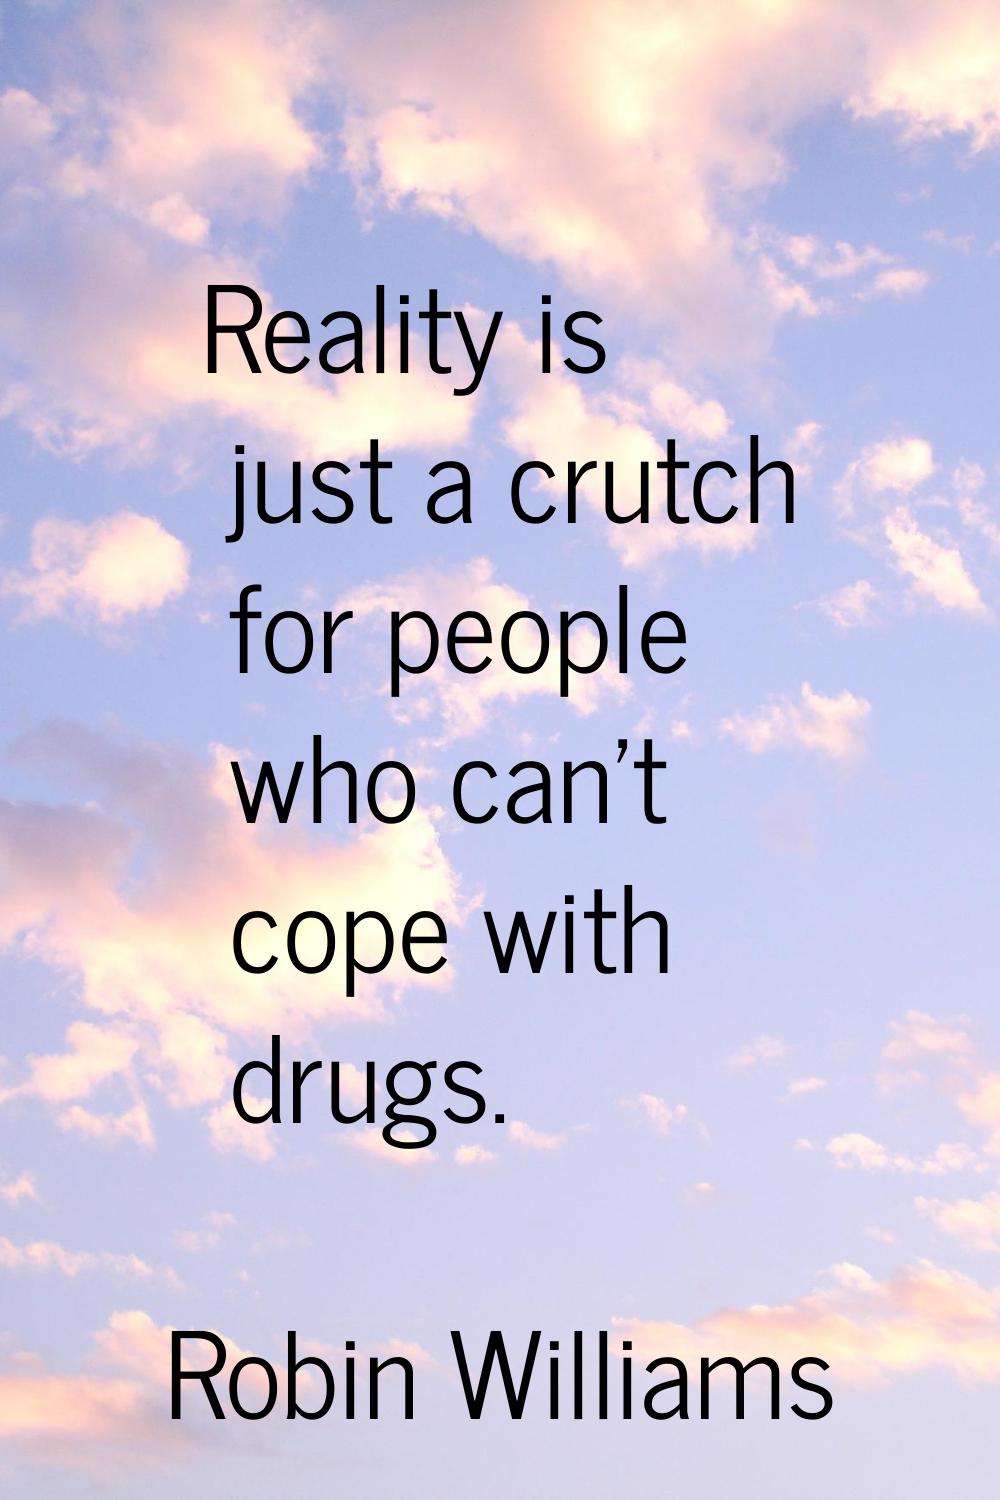 Reality is just a crutch for people who can't cope with drugs.